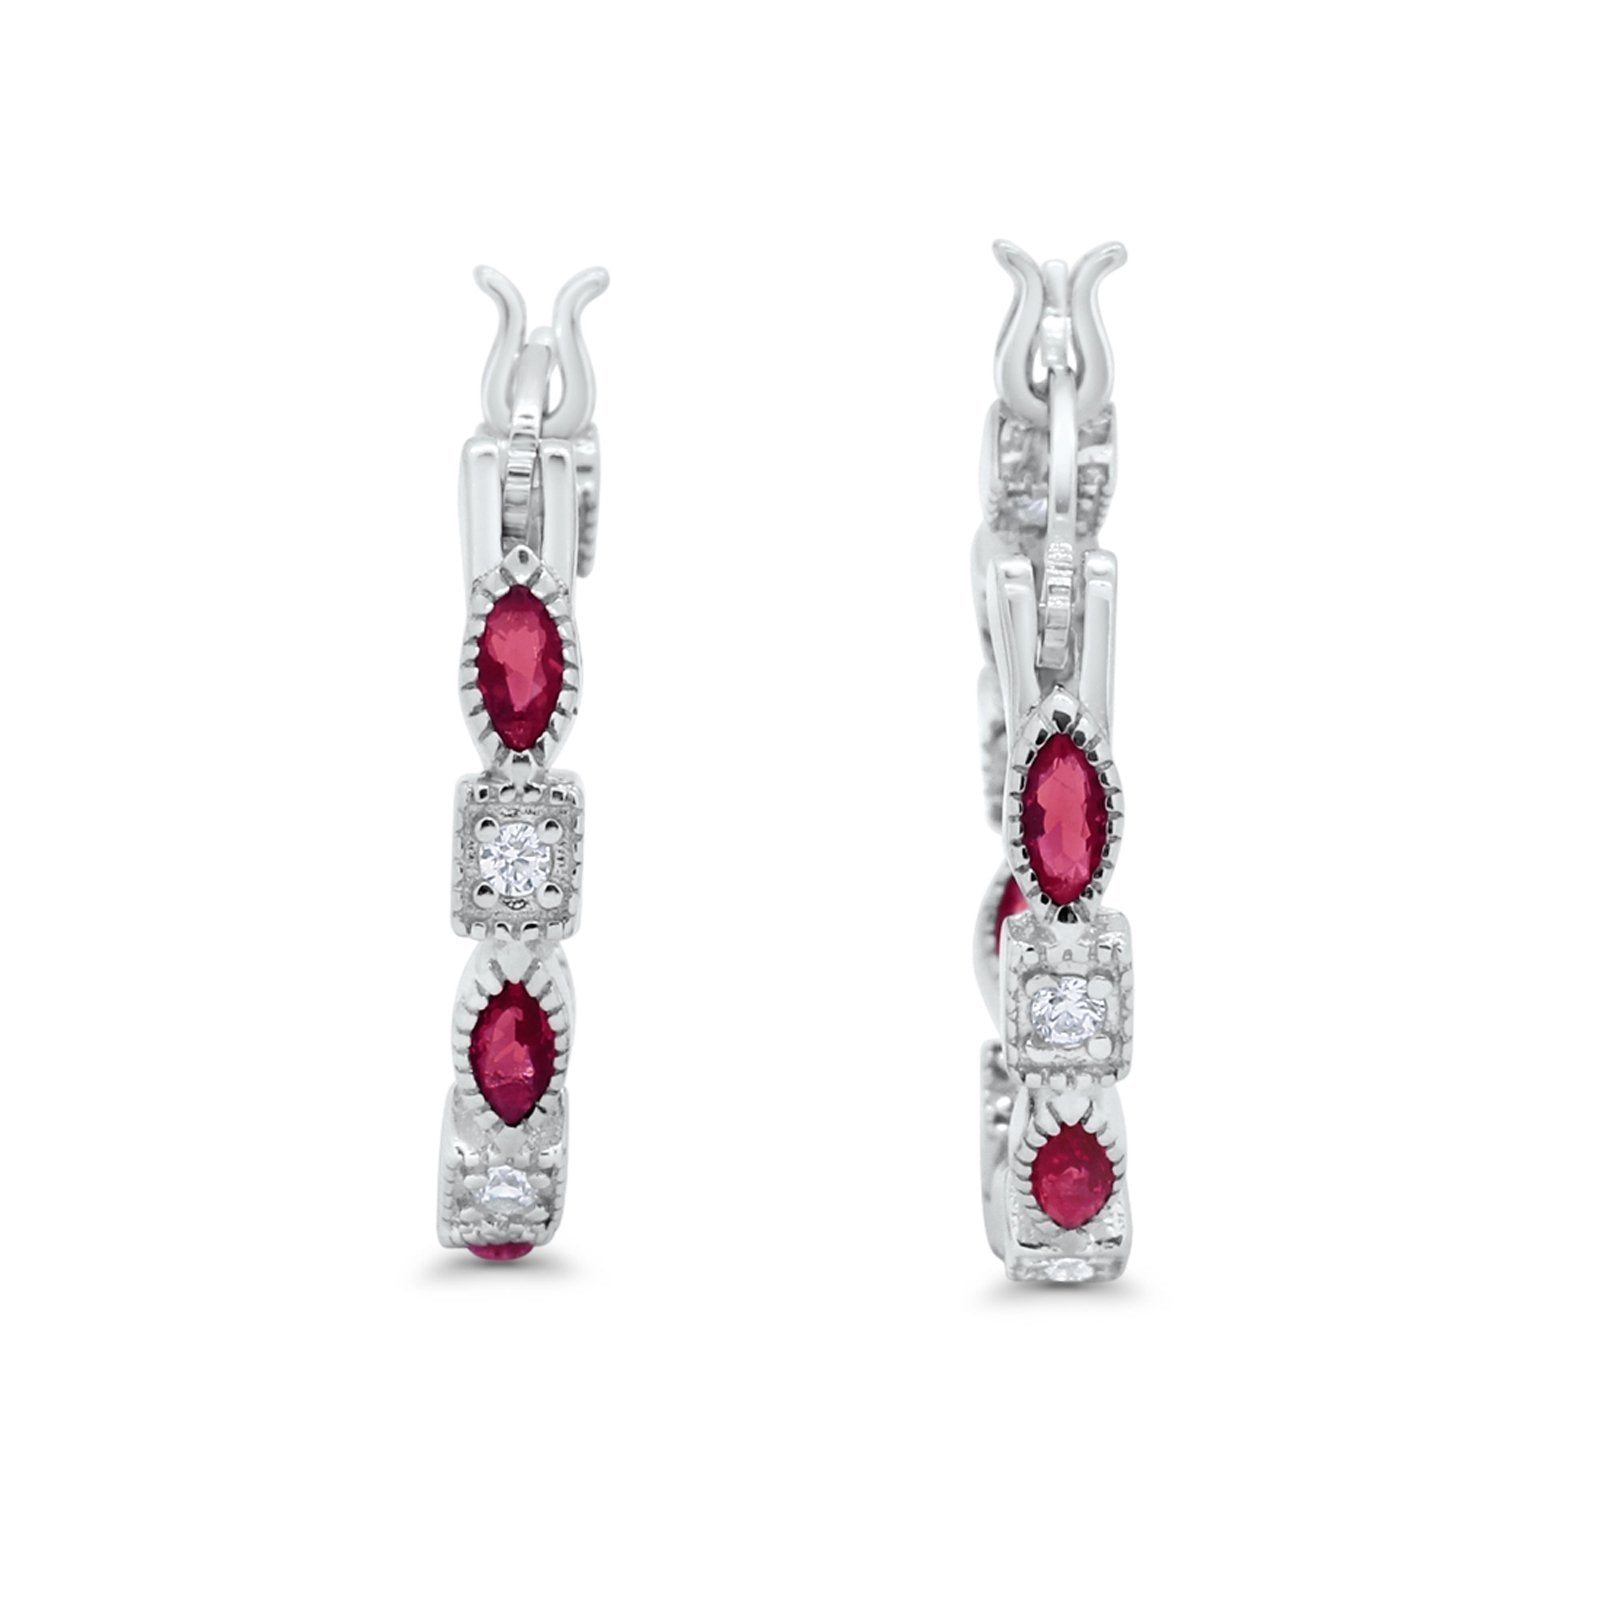 Art Deco Hoop Earrings Marquise Round Simulated Ruby CZ 925 Sterling Silver